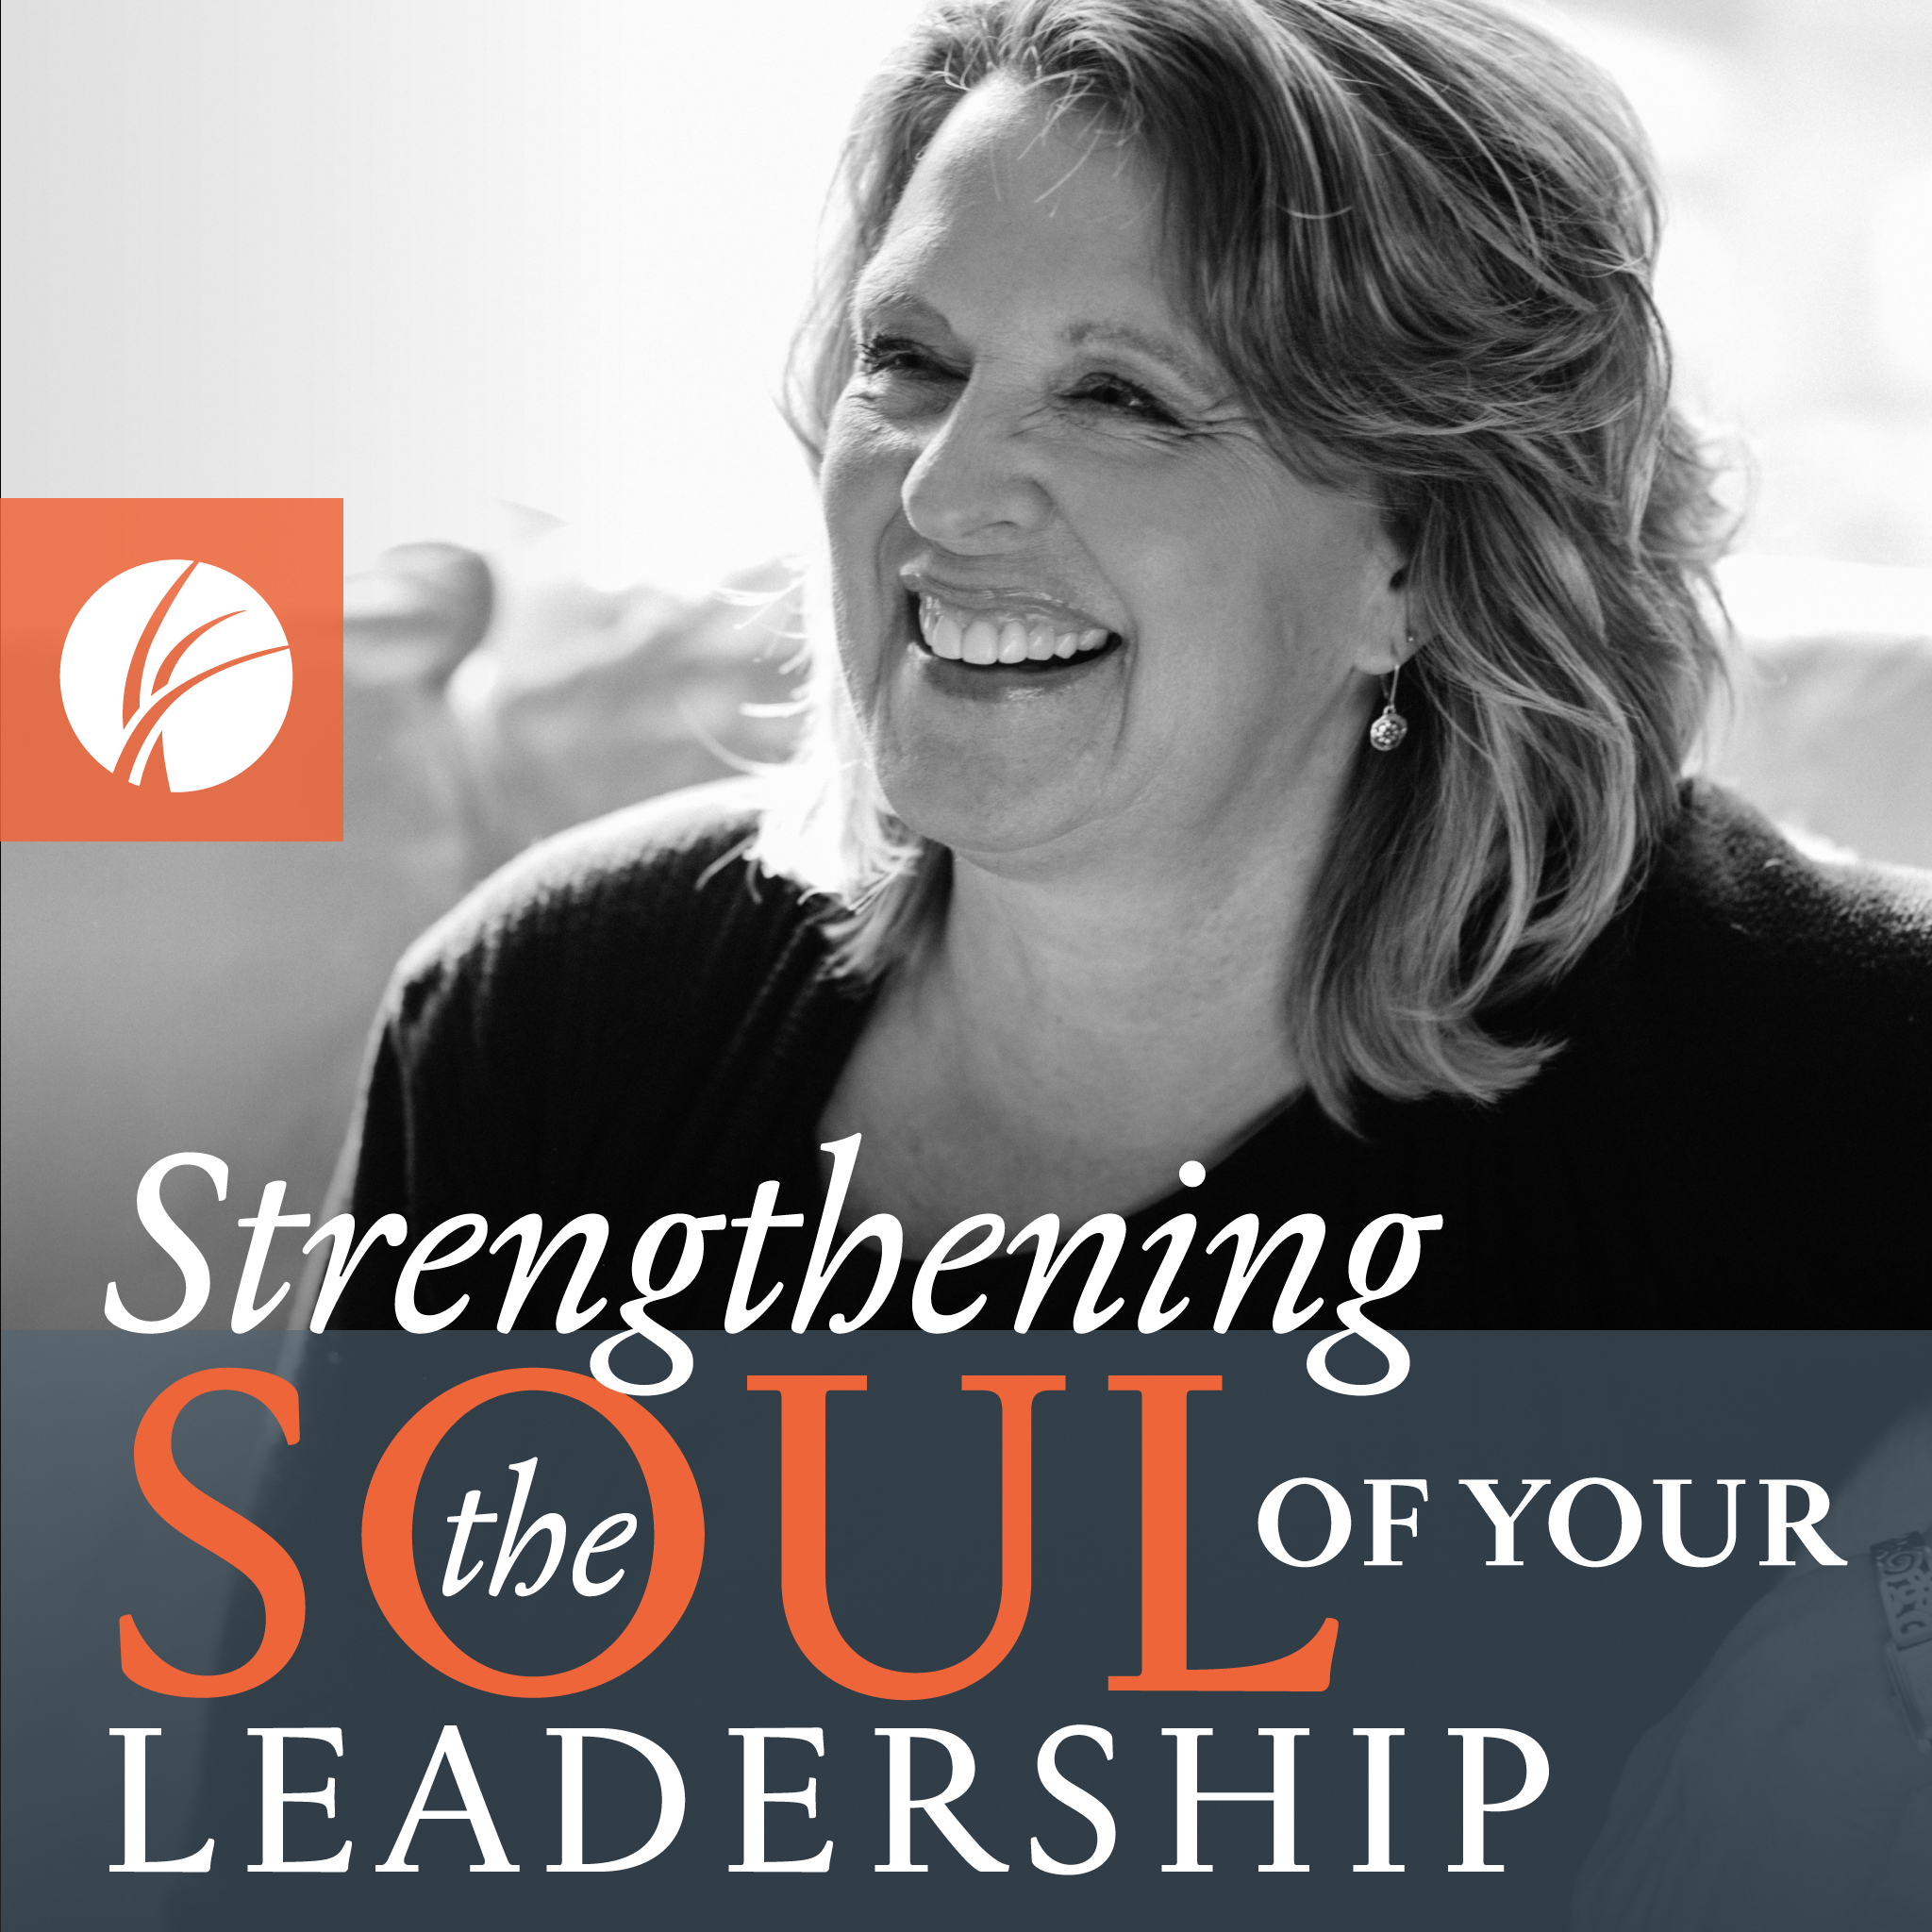 Cover of the Strengthening the Soul of Your Leadership podcast. Features a black and white photo of a smiling Ruth Haley Barton in conversation.